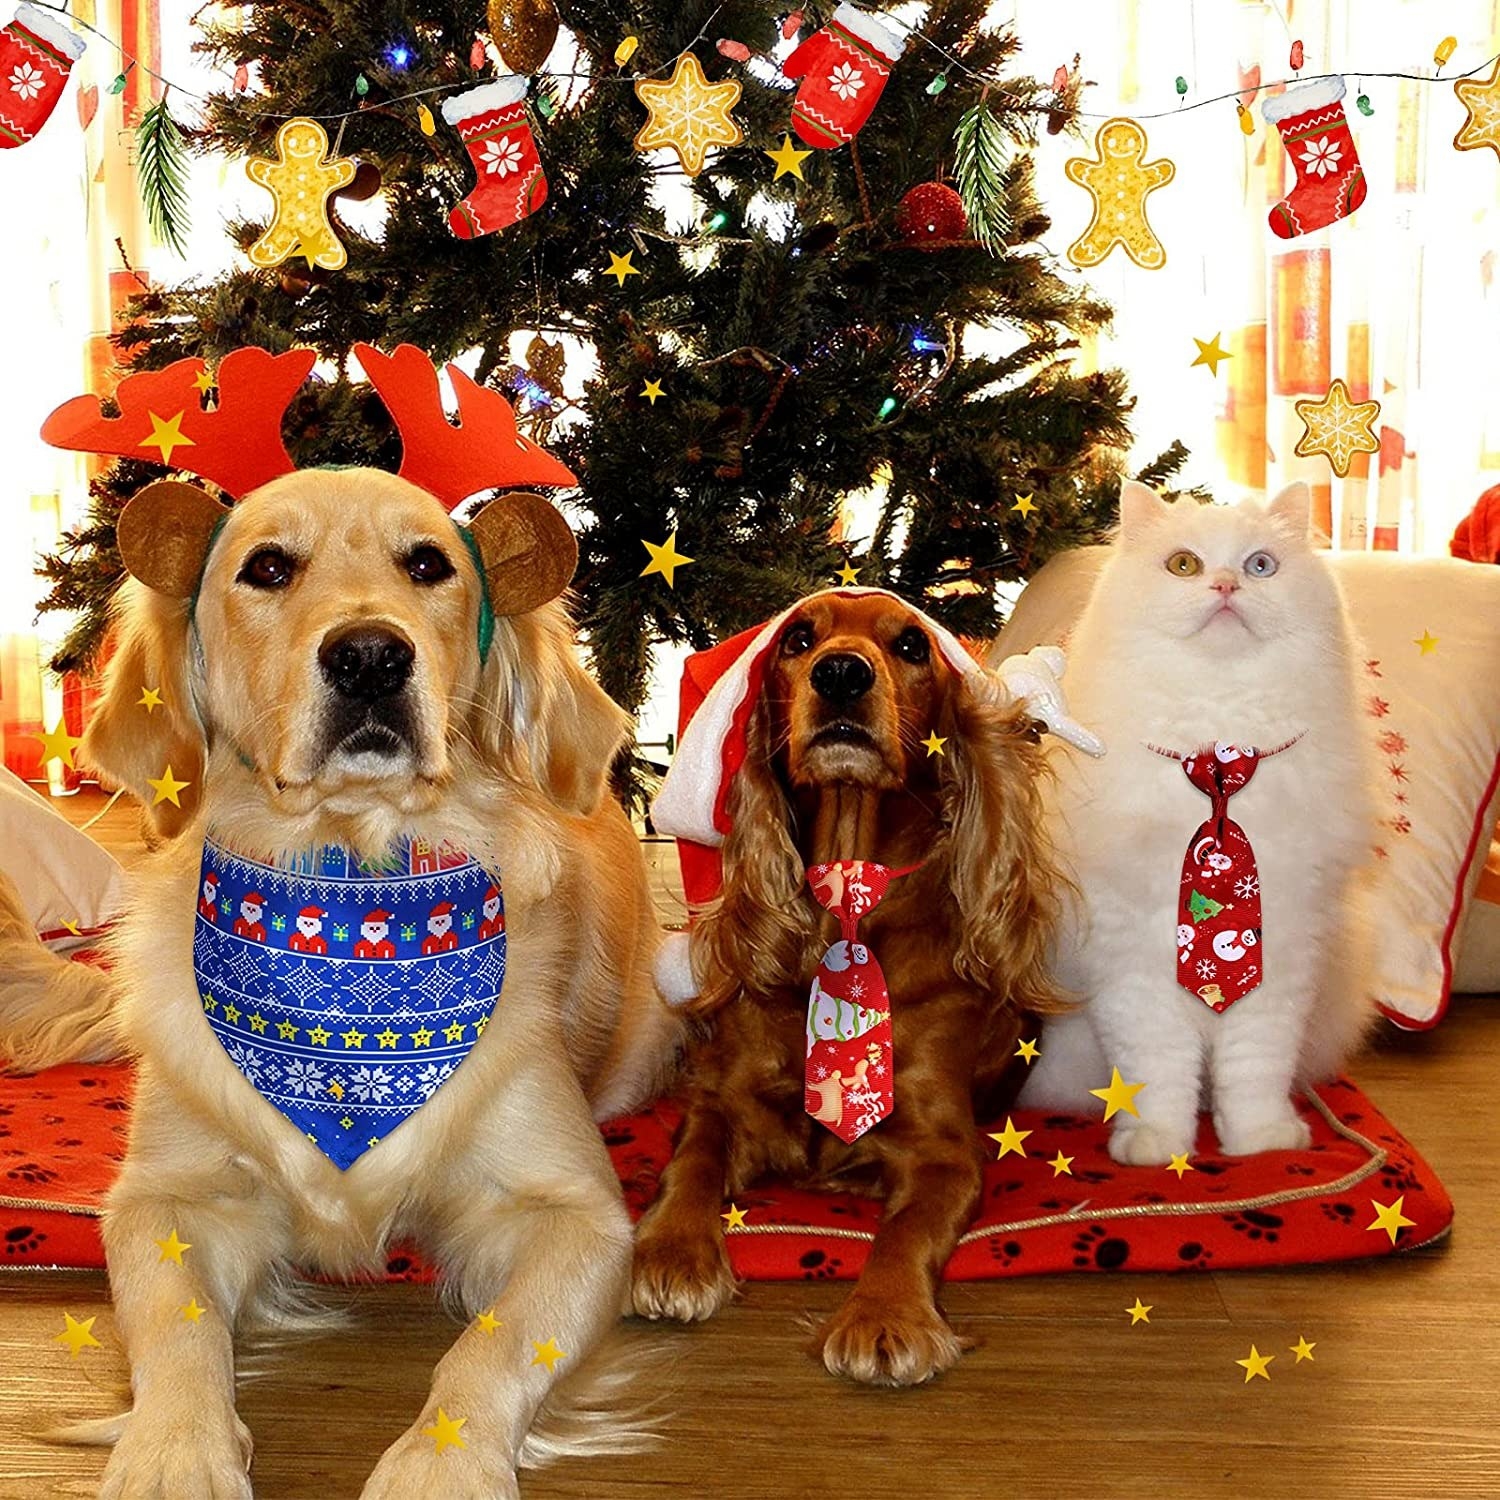 Two dogs and a cat wearing neckties and a holiday bandana